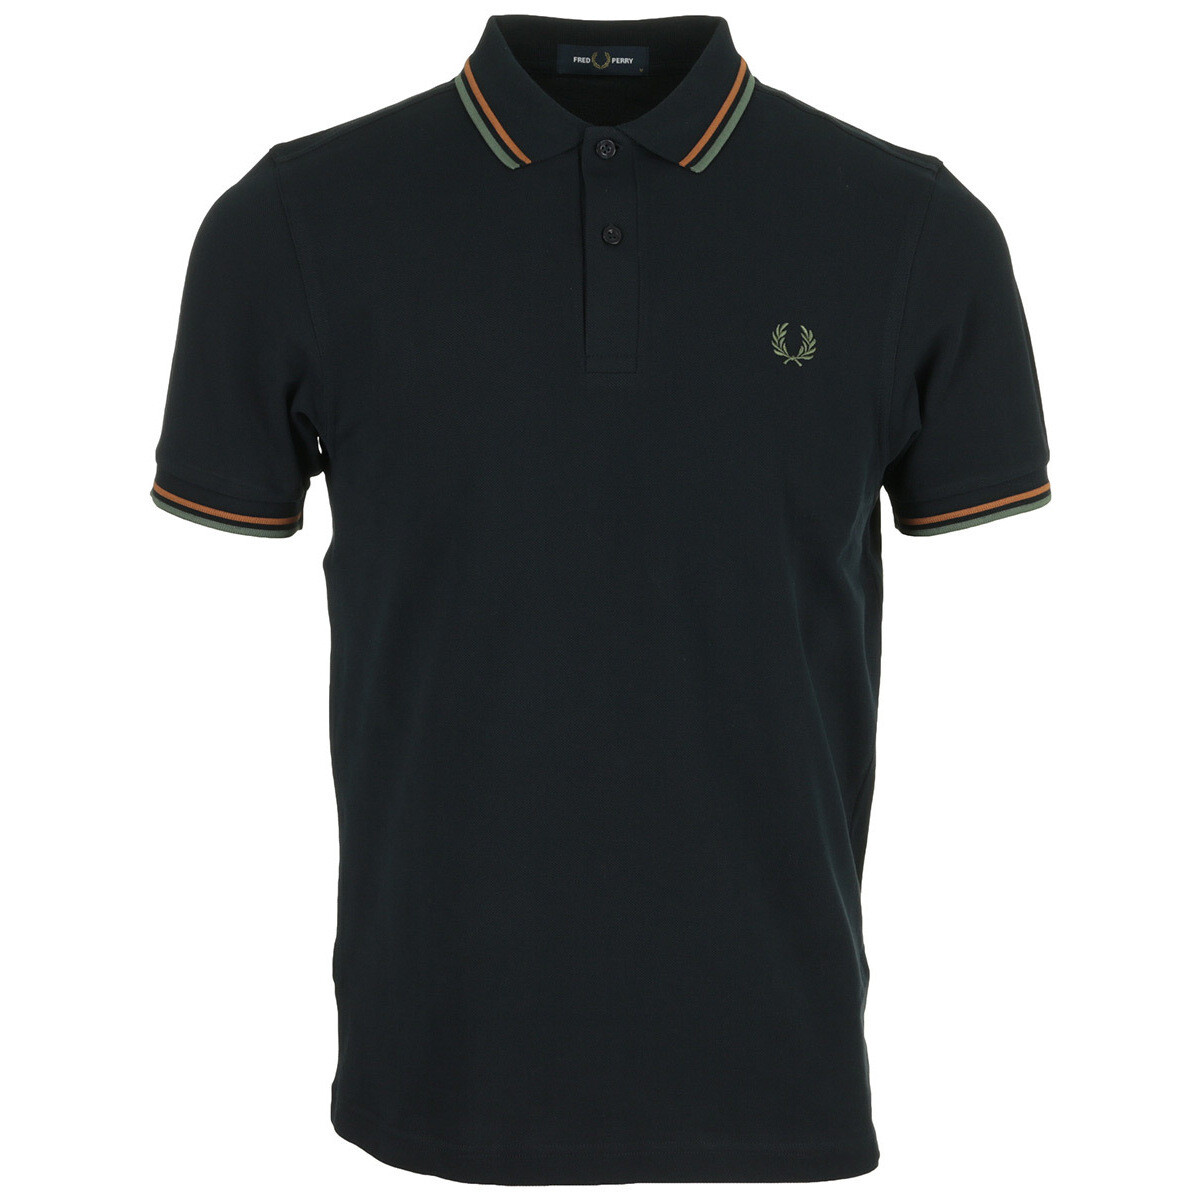 textil Hombre Tops y Camisetas Fred Perry Twin Tipped Azul